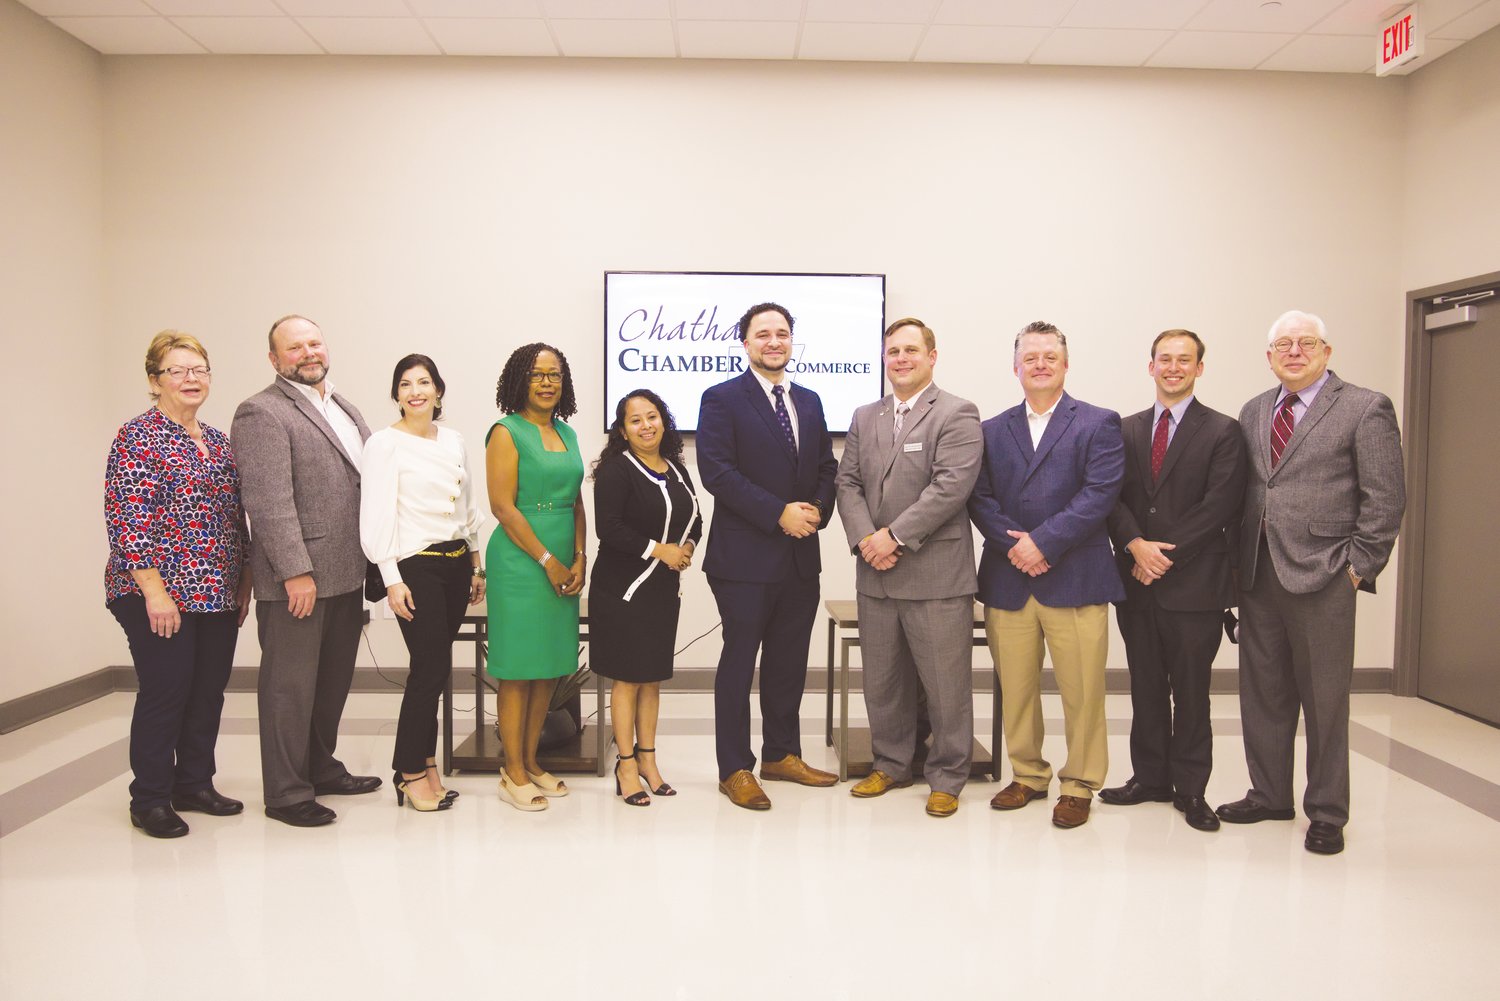 The Chatham Chamber Commerce, pictured (from left) in November 2020: Chamber President Cindy Poindexter and those recognized at the organization's annual meeting: Kevin O'Dell, Erica Sanders, Indira Everett, Jazmin Mendoza Sosa, James Jernigan, Lyle Donaldson, Tony Cash, Eric Williams and Mark Reif.